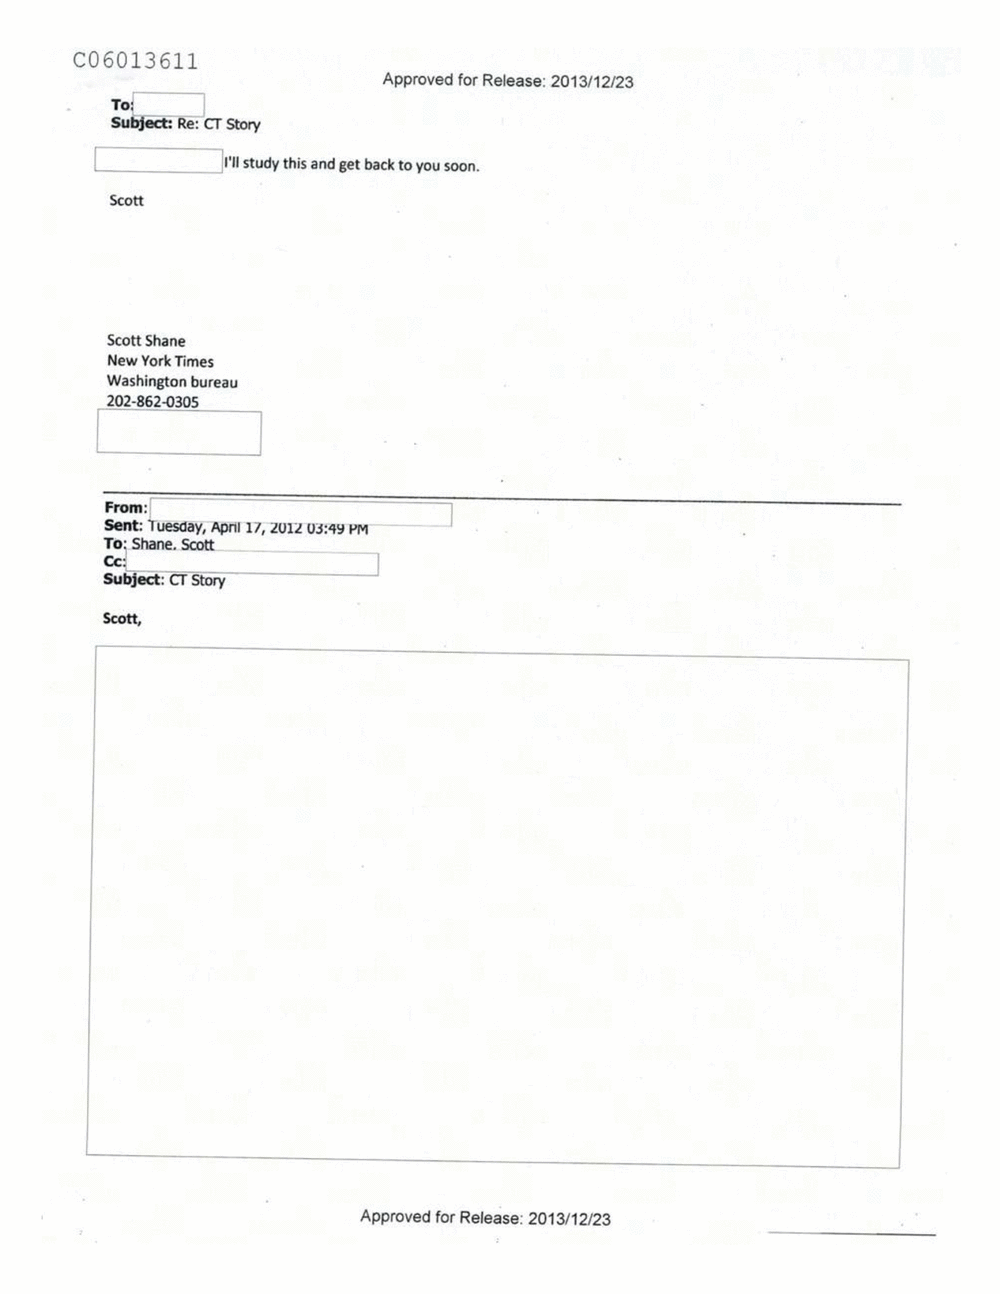 Page 429 from Email Correspondence Between Reporters and CIA Flacks